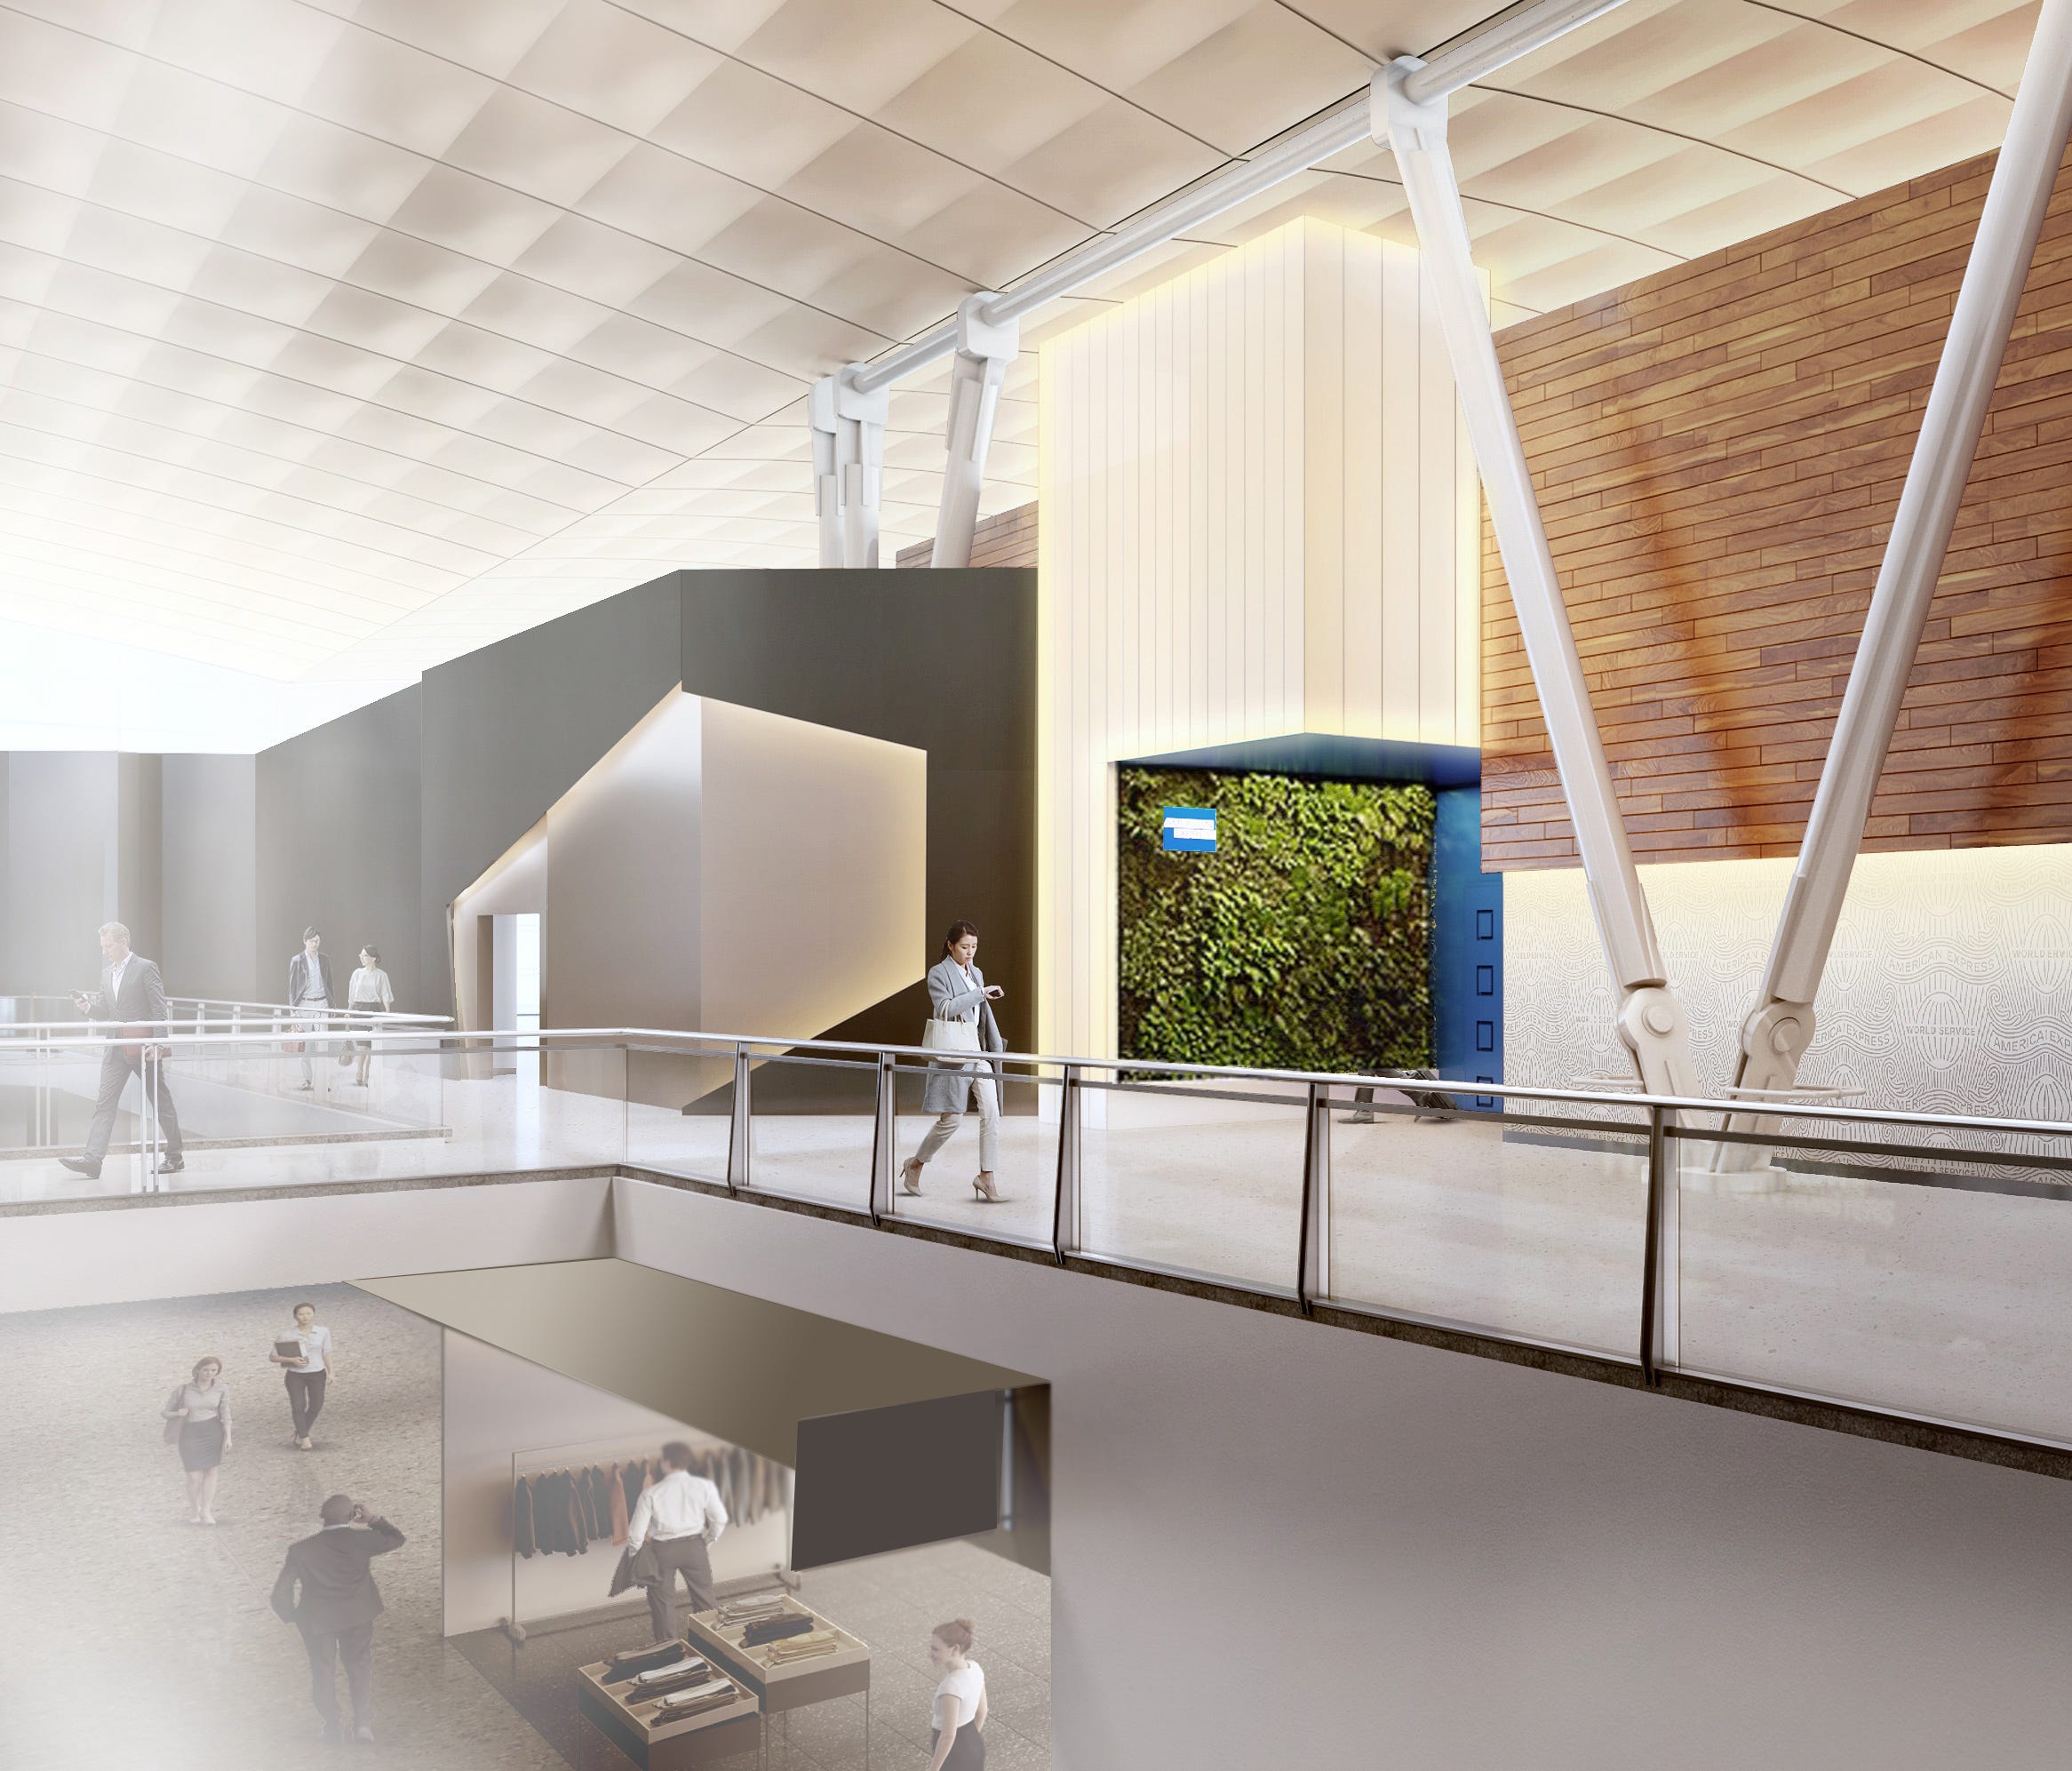 American Express provided this rending that shows the entrance to its planned new Centurion Lounge at Terminal 4 of  New York's JFK Airport.